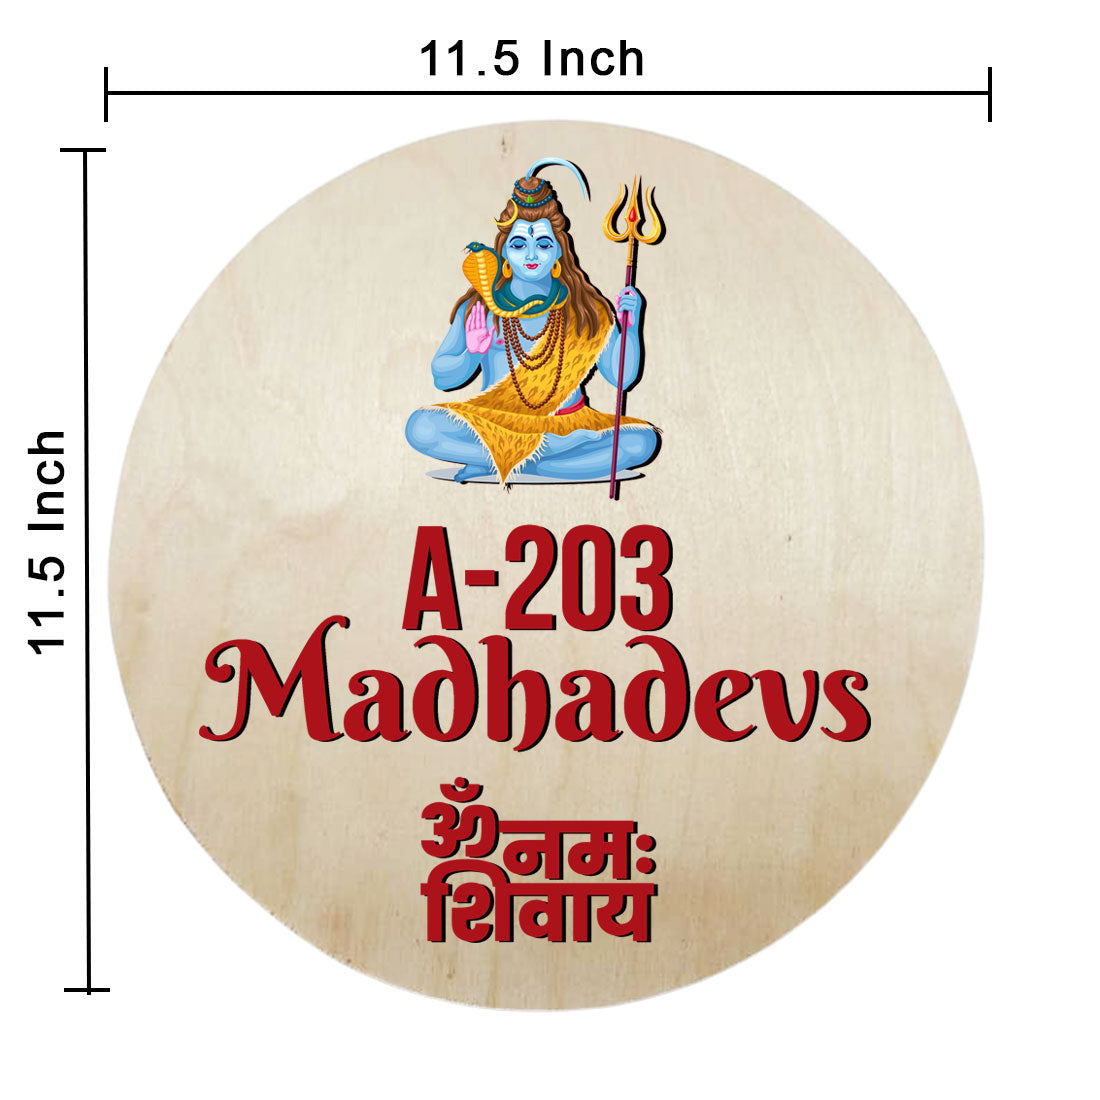 Mahadev Name Plate for Home Round Nameplate with Lord Shiva - Available in Wood and Acrylic